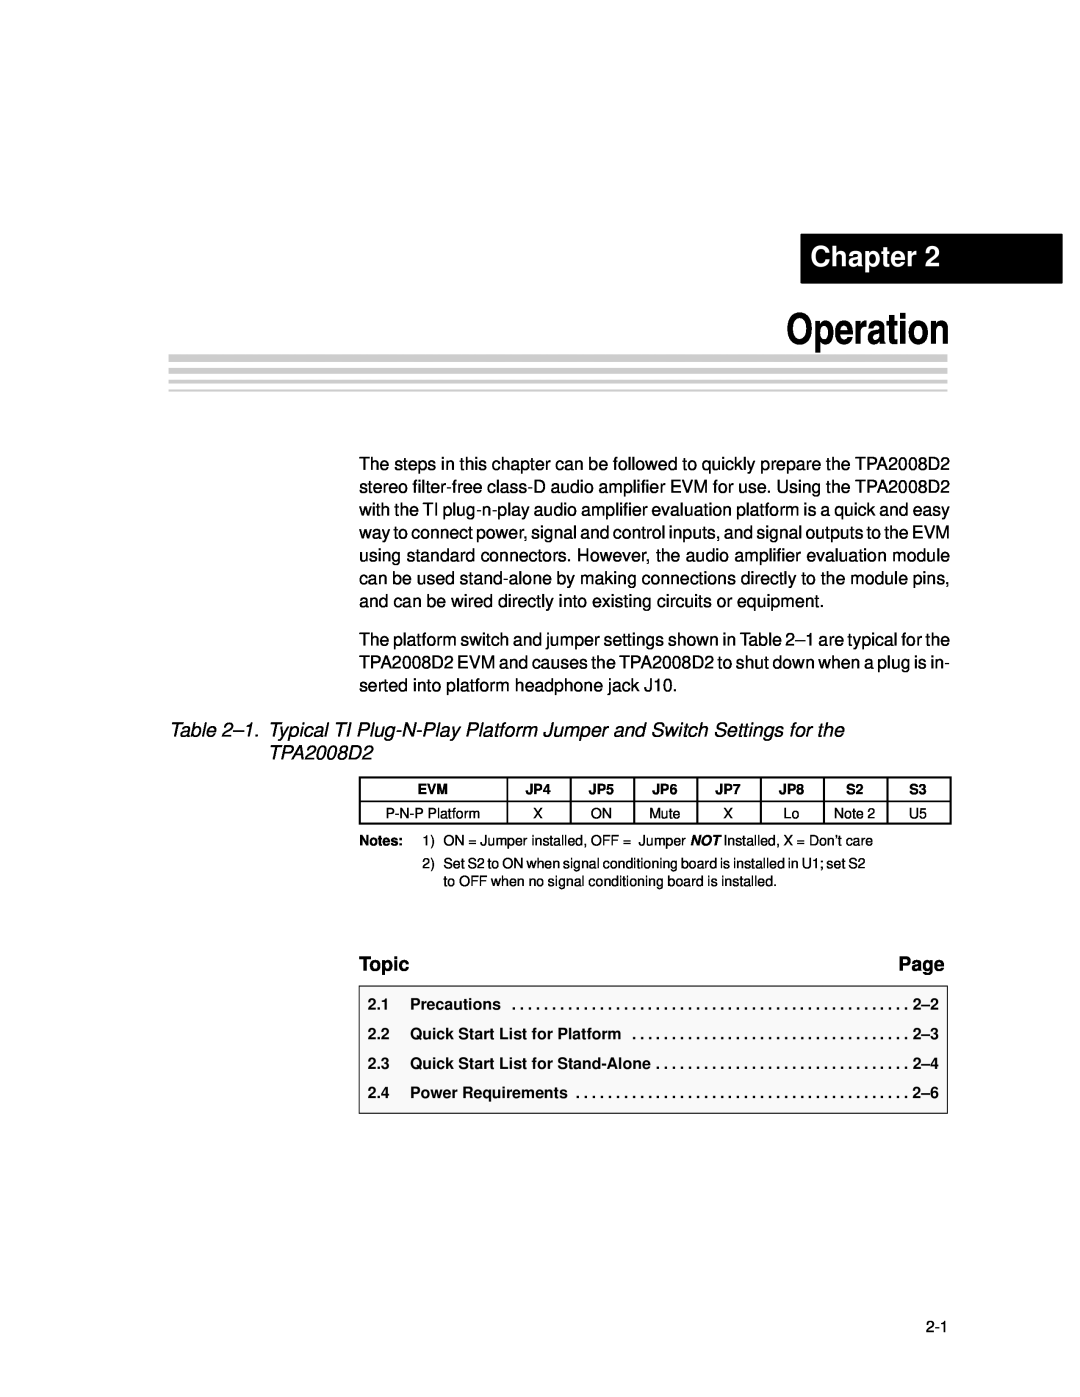 Texas Instruments TPA2008D2 manual Operation, Chapter, Page, Topic 